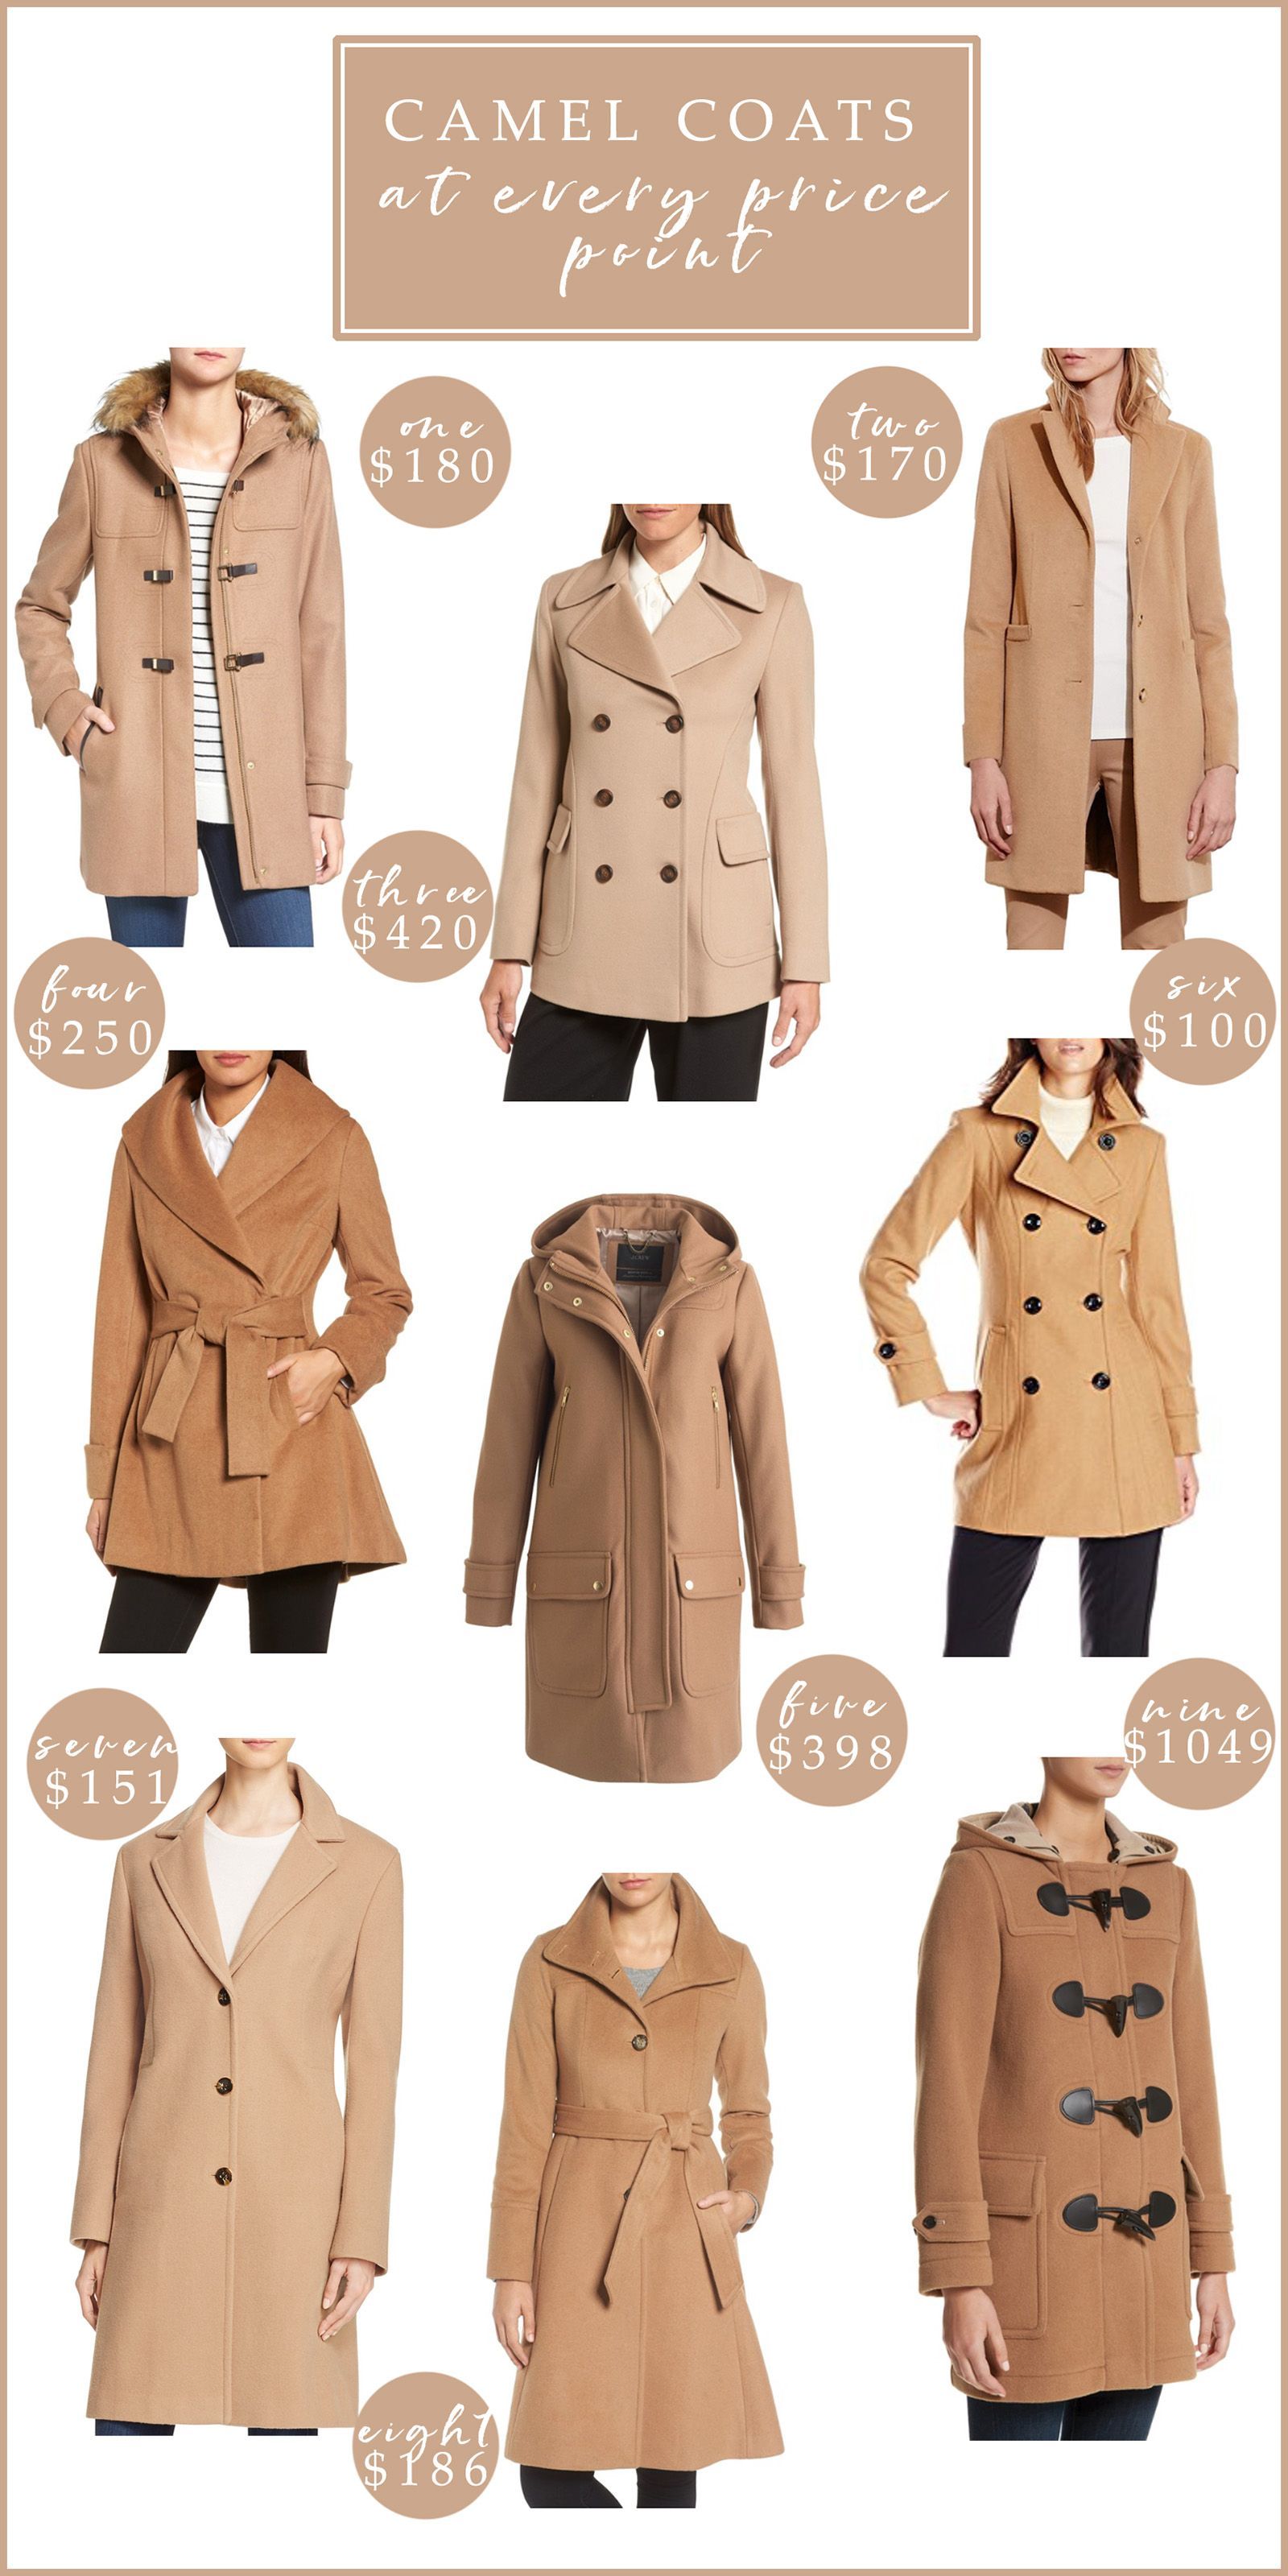 Why You Need A Camel Coat in Your Wardrobe -   23 preppy style tips
 ideas